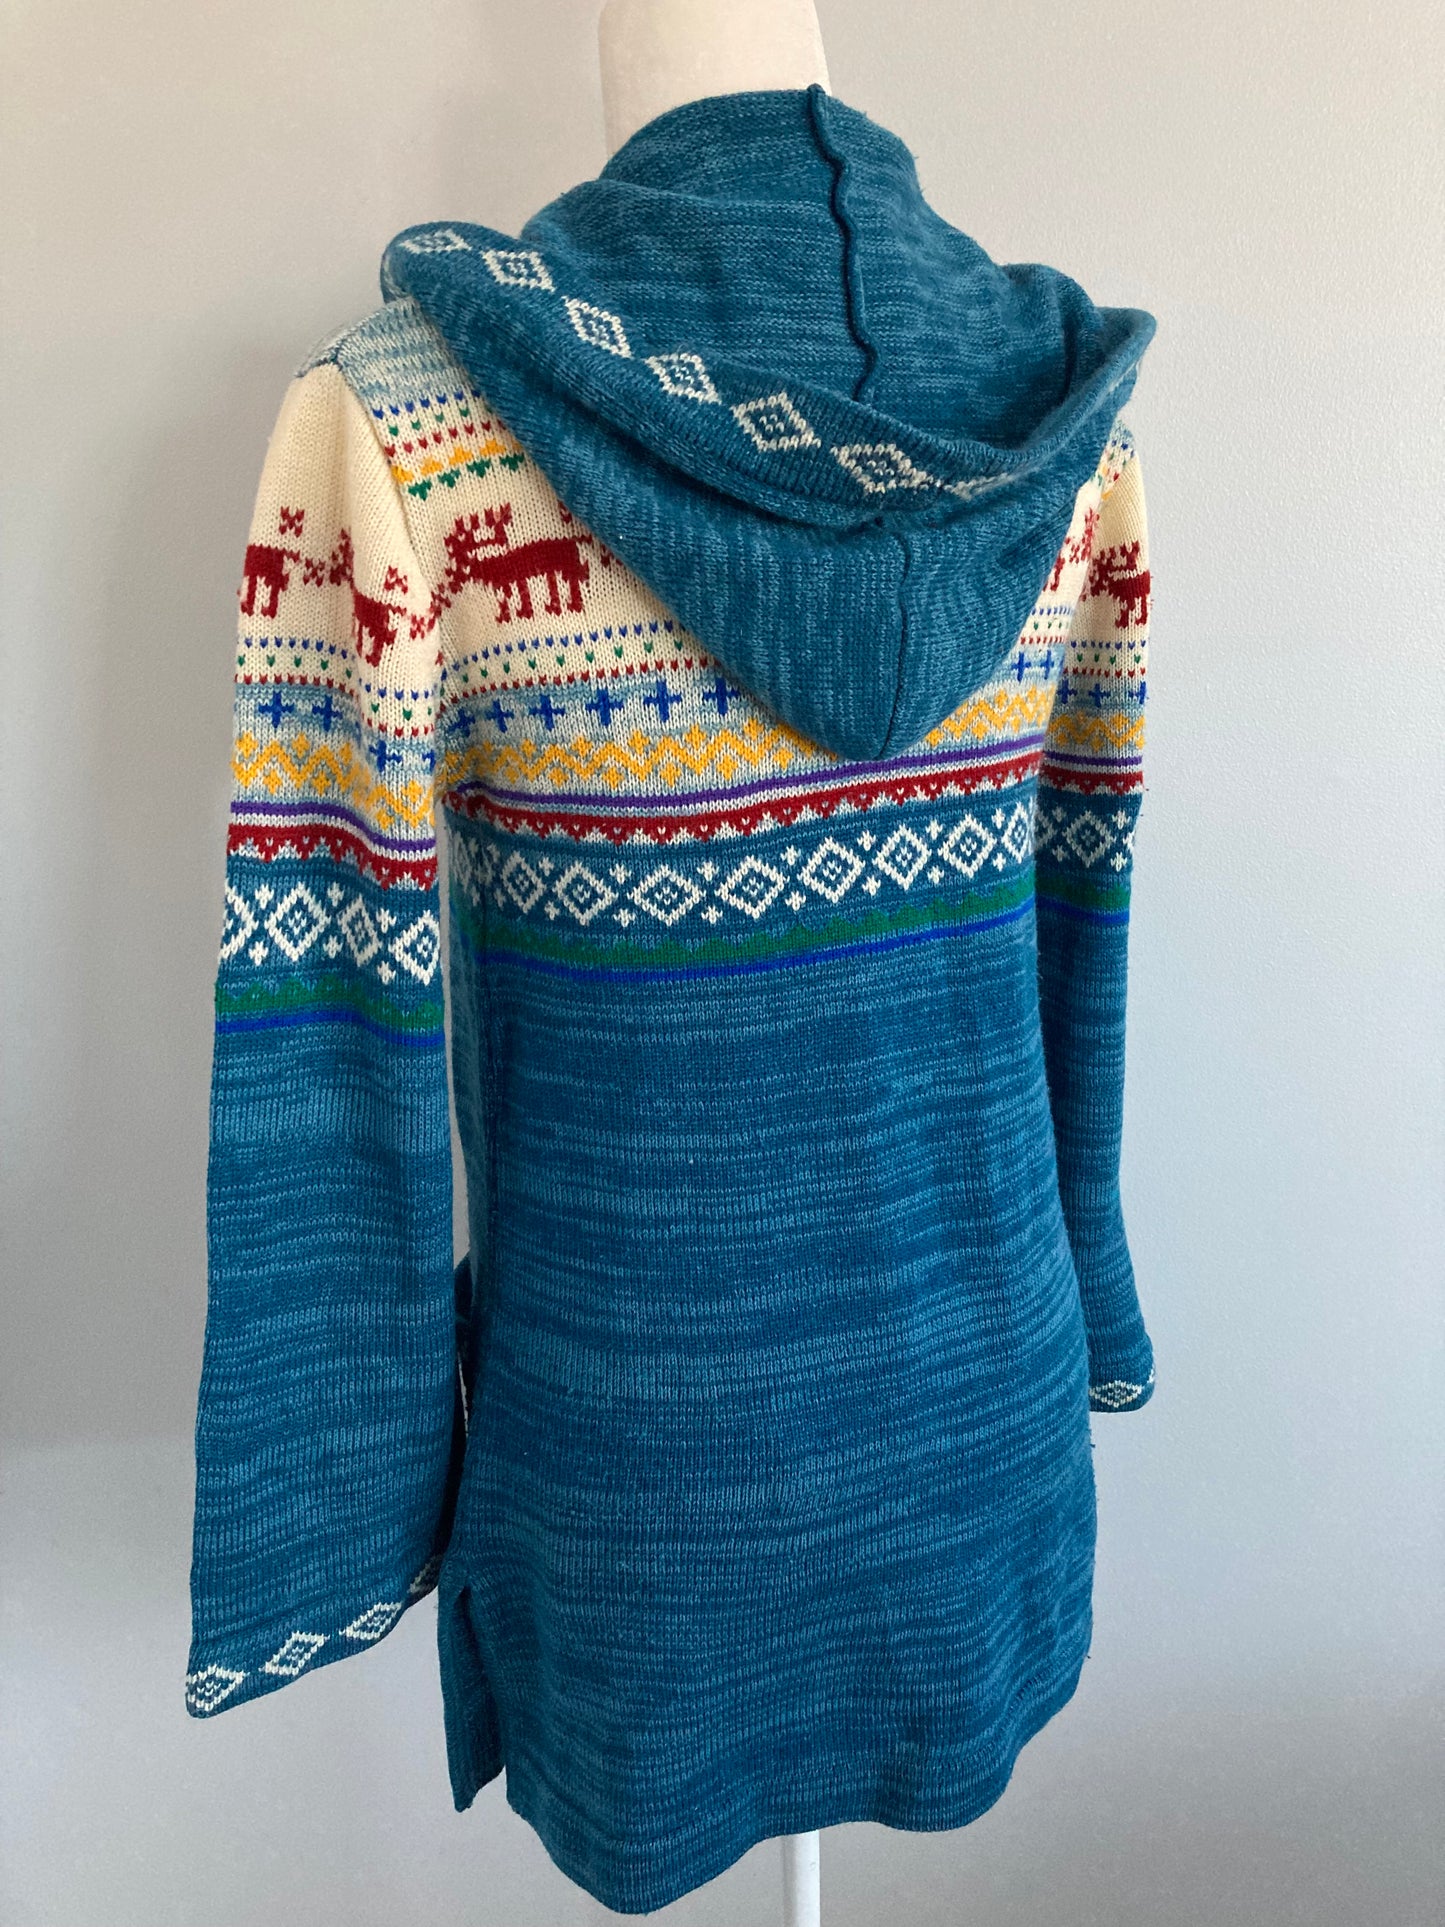 1970s Hooded Bell Sleeve Sweater, Size M